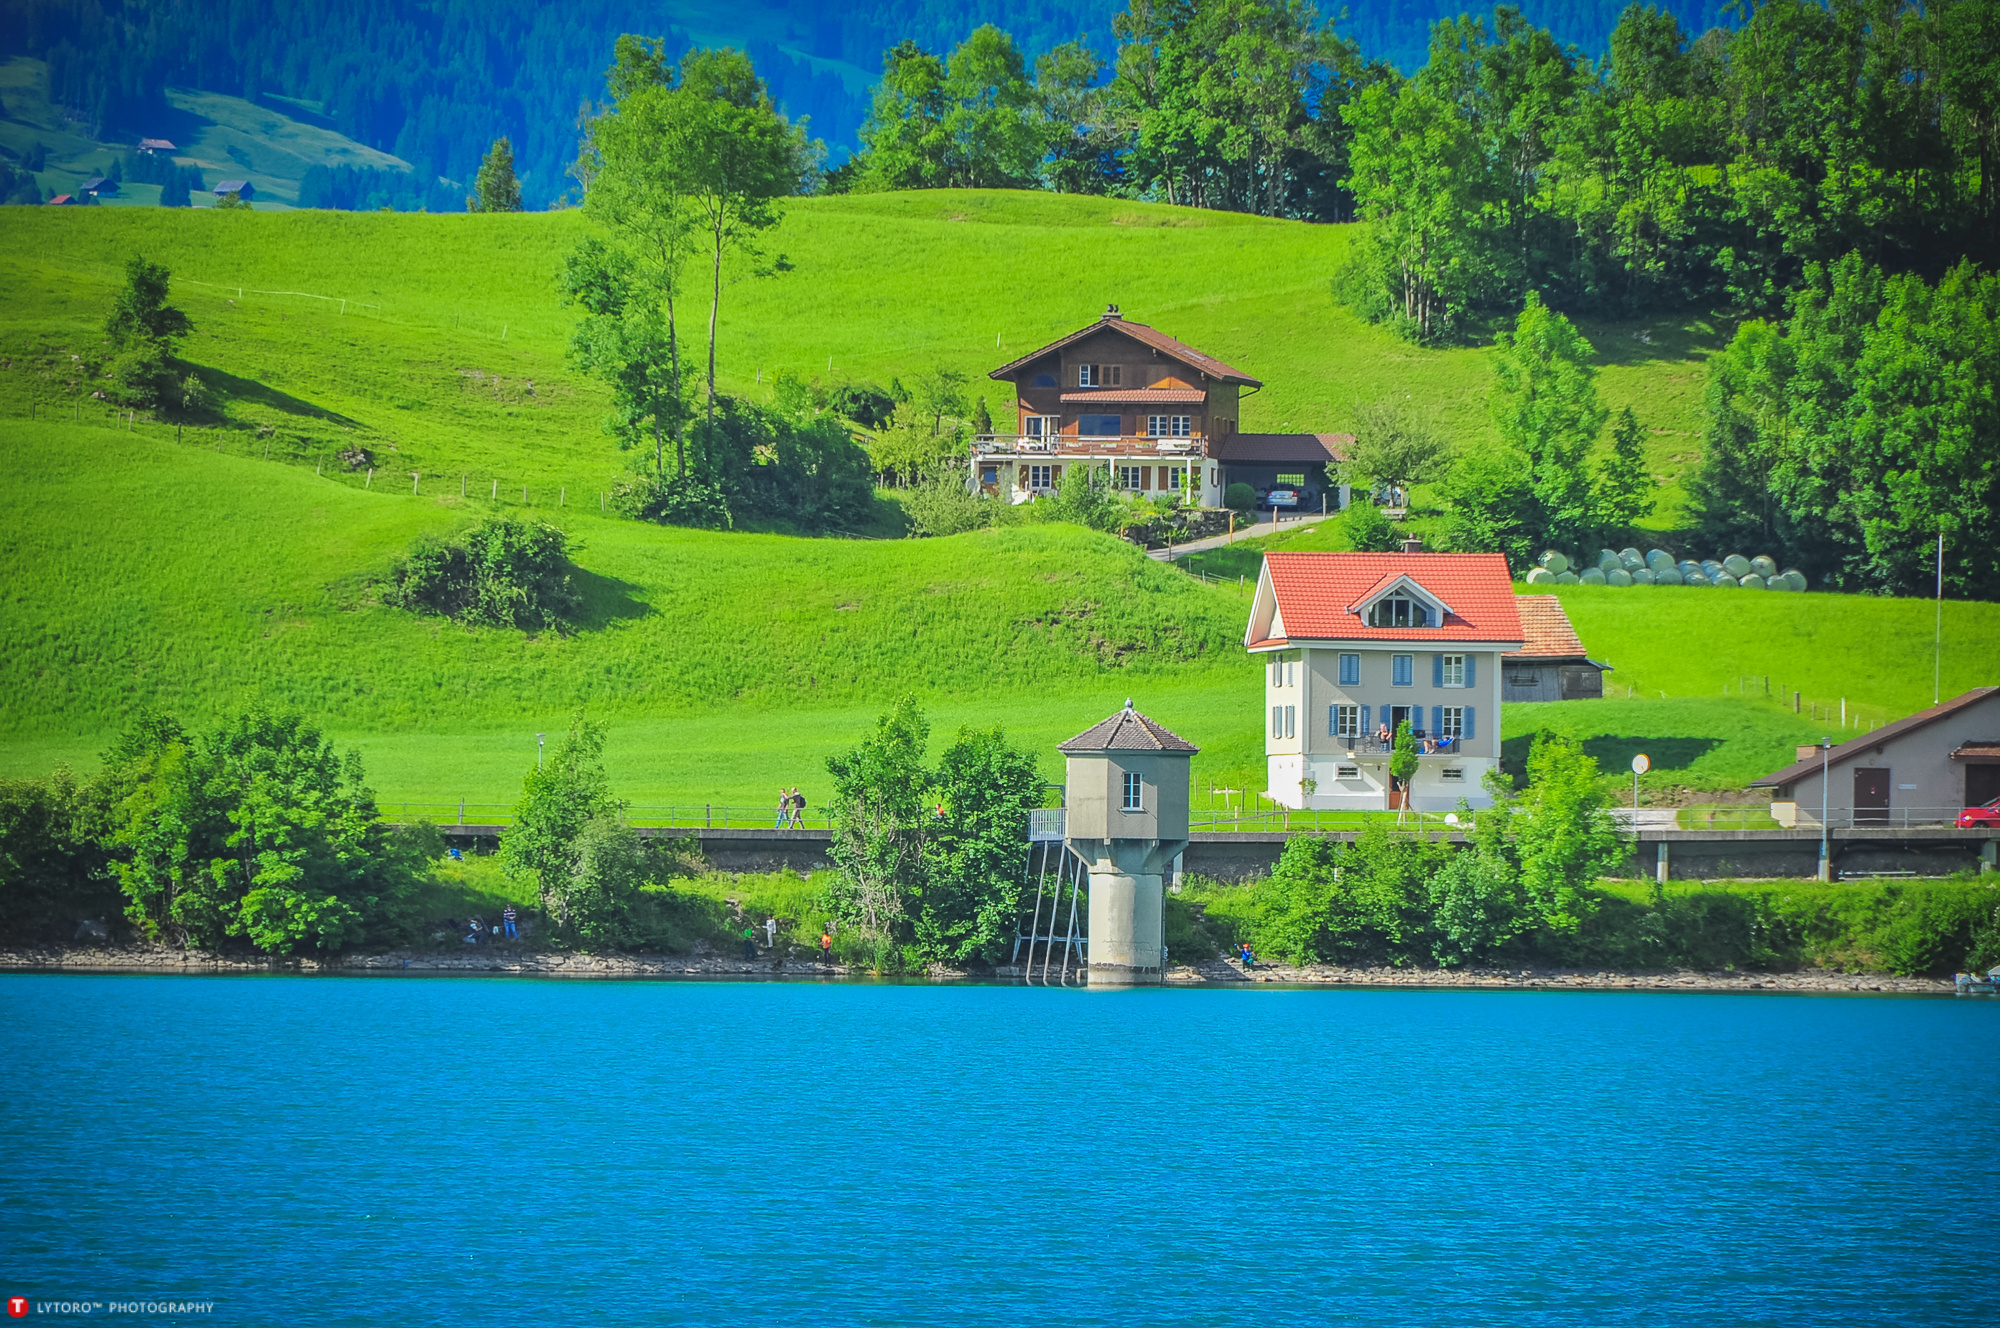 #800365 4K, 5K, Lucerne, Switzerland, Houses, Lake, Trees - Rare Gallery HD Wallpapers